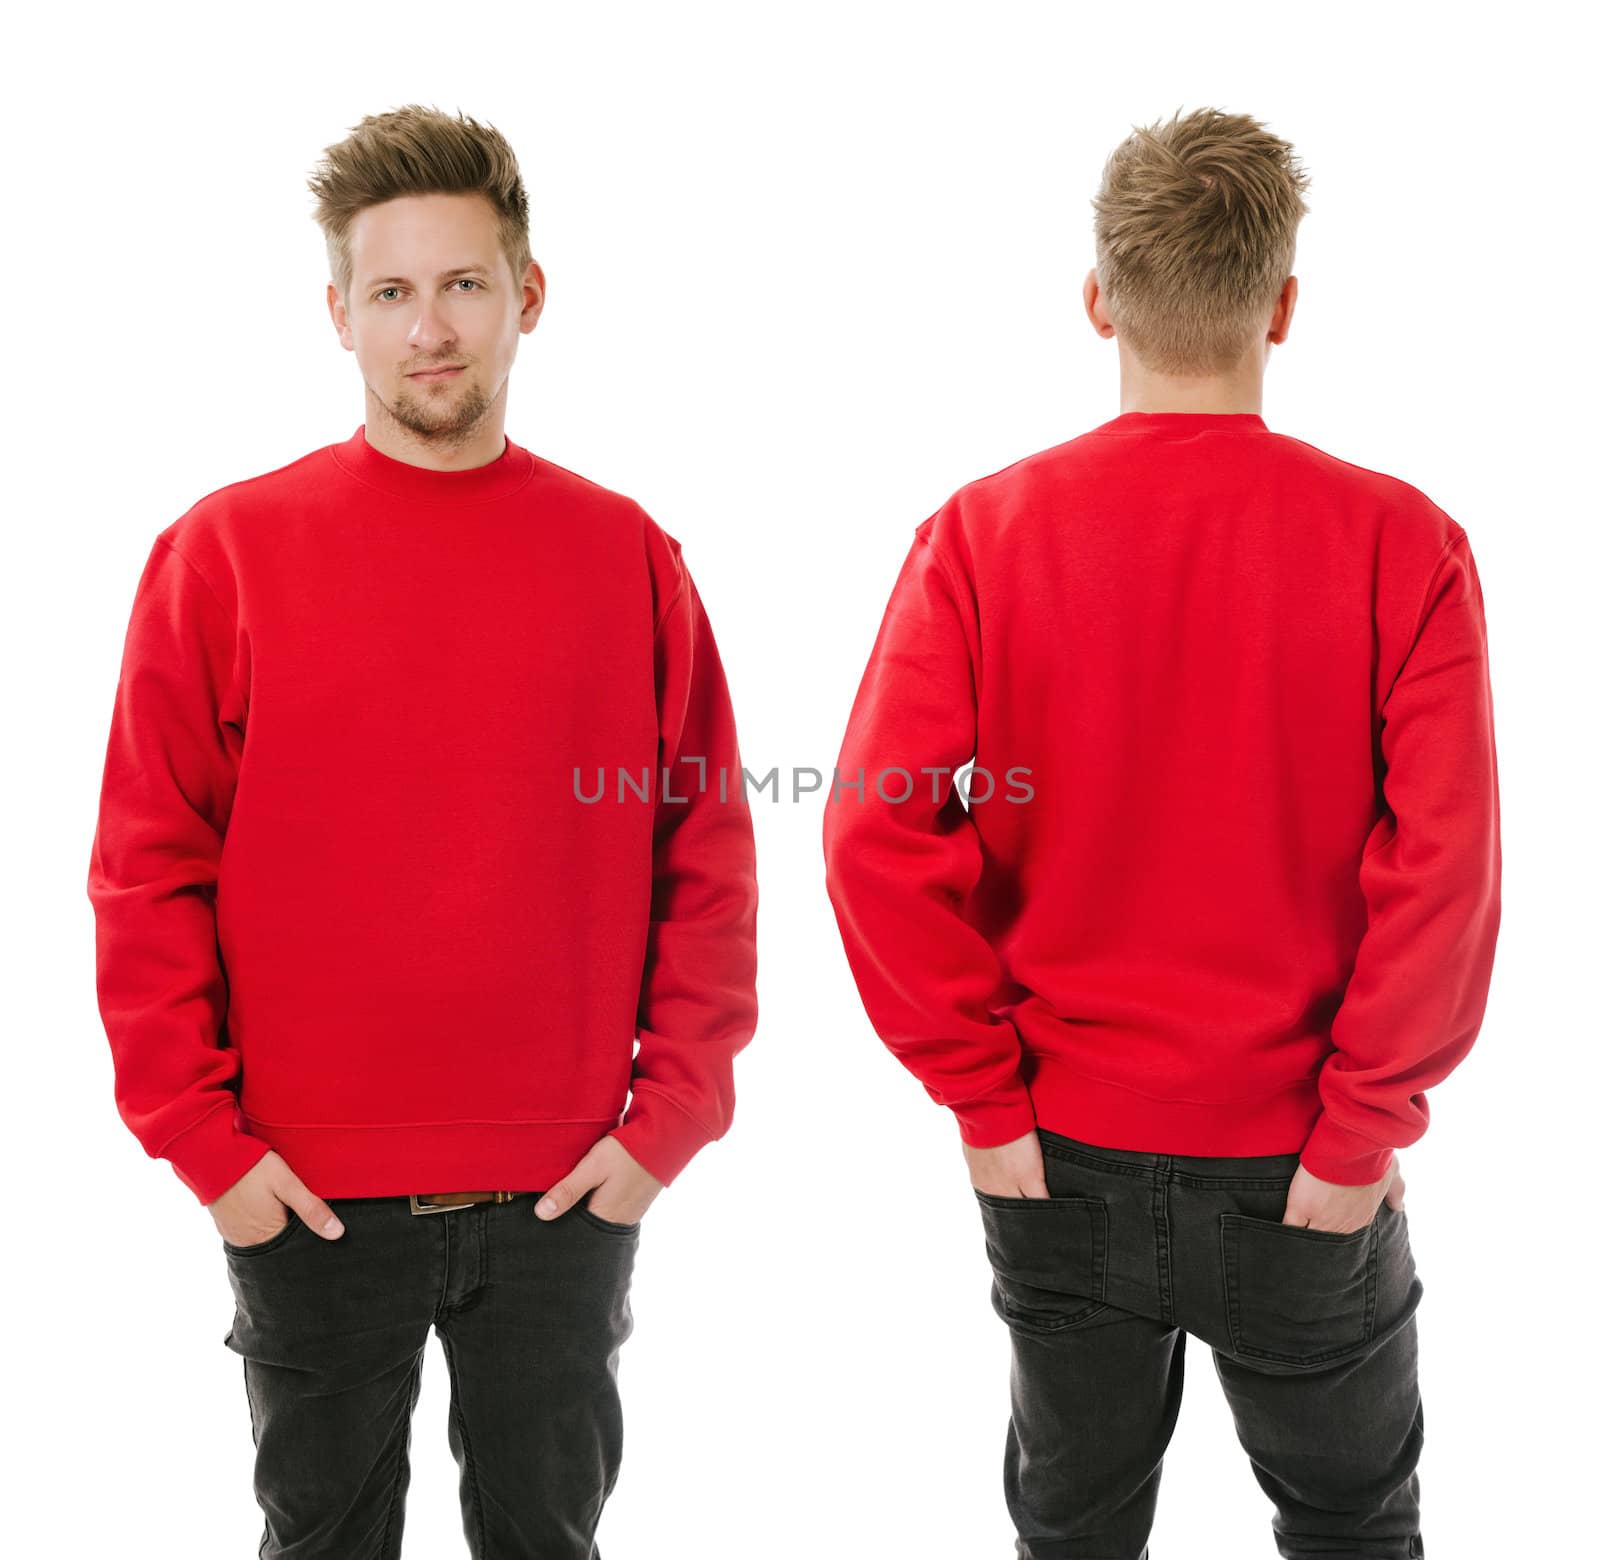 Photo of a man wearing blank red sweatshirt, front and back. Ready for your design or artwork.